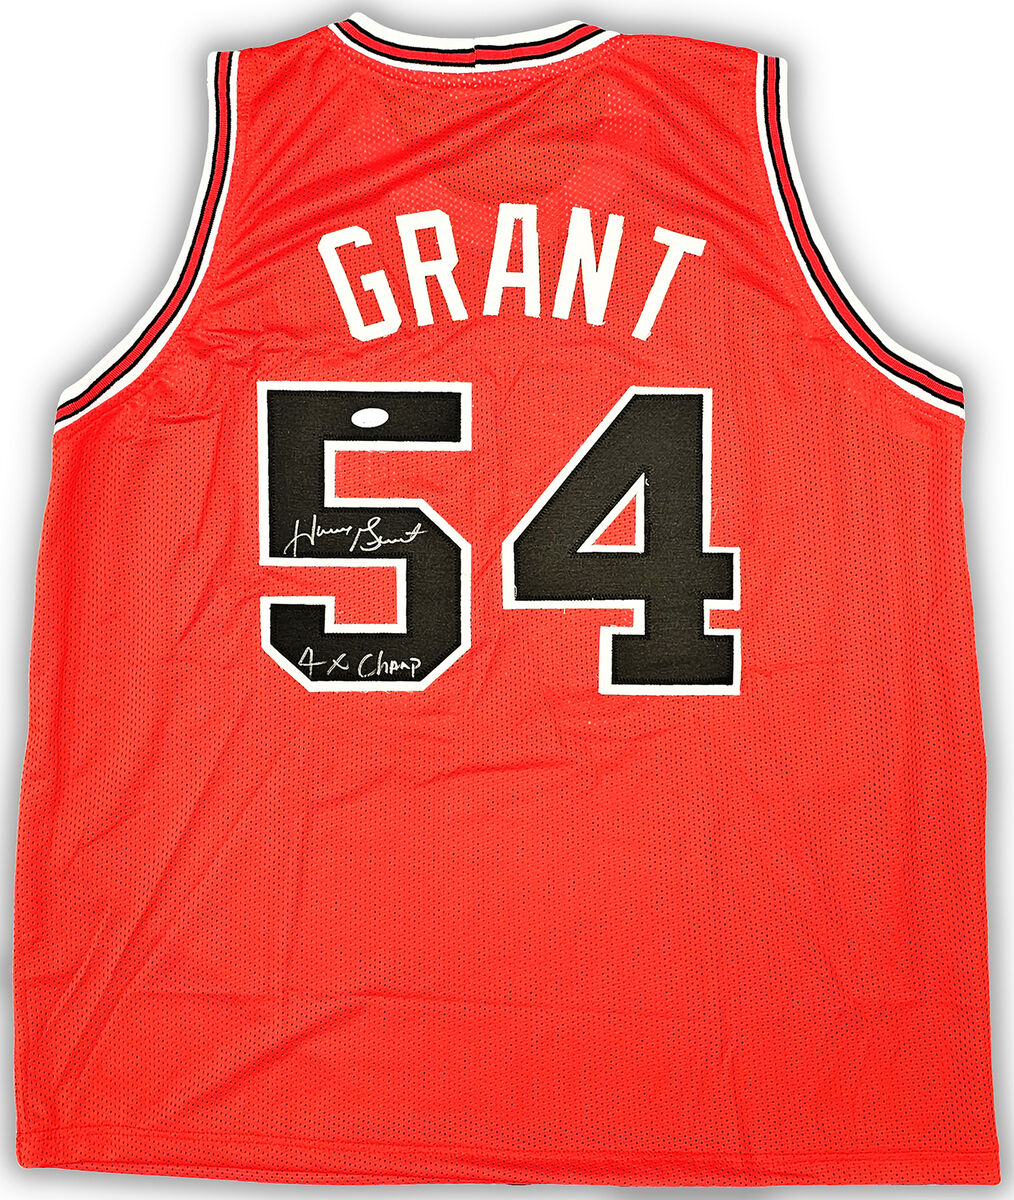 CHICAGO BULLS HORACE GRANT AUTOGRAPHED RED JERSEY 4X CHAMPS JSA STOCK  #215707